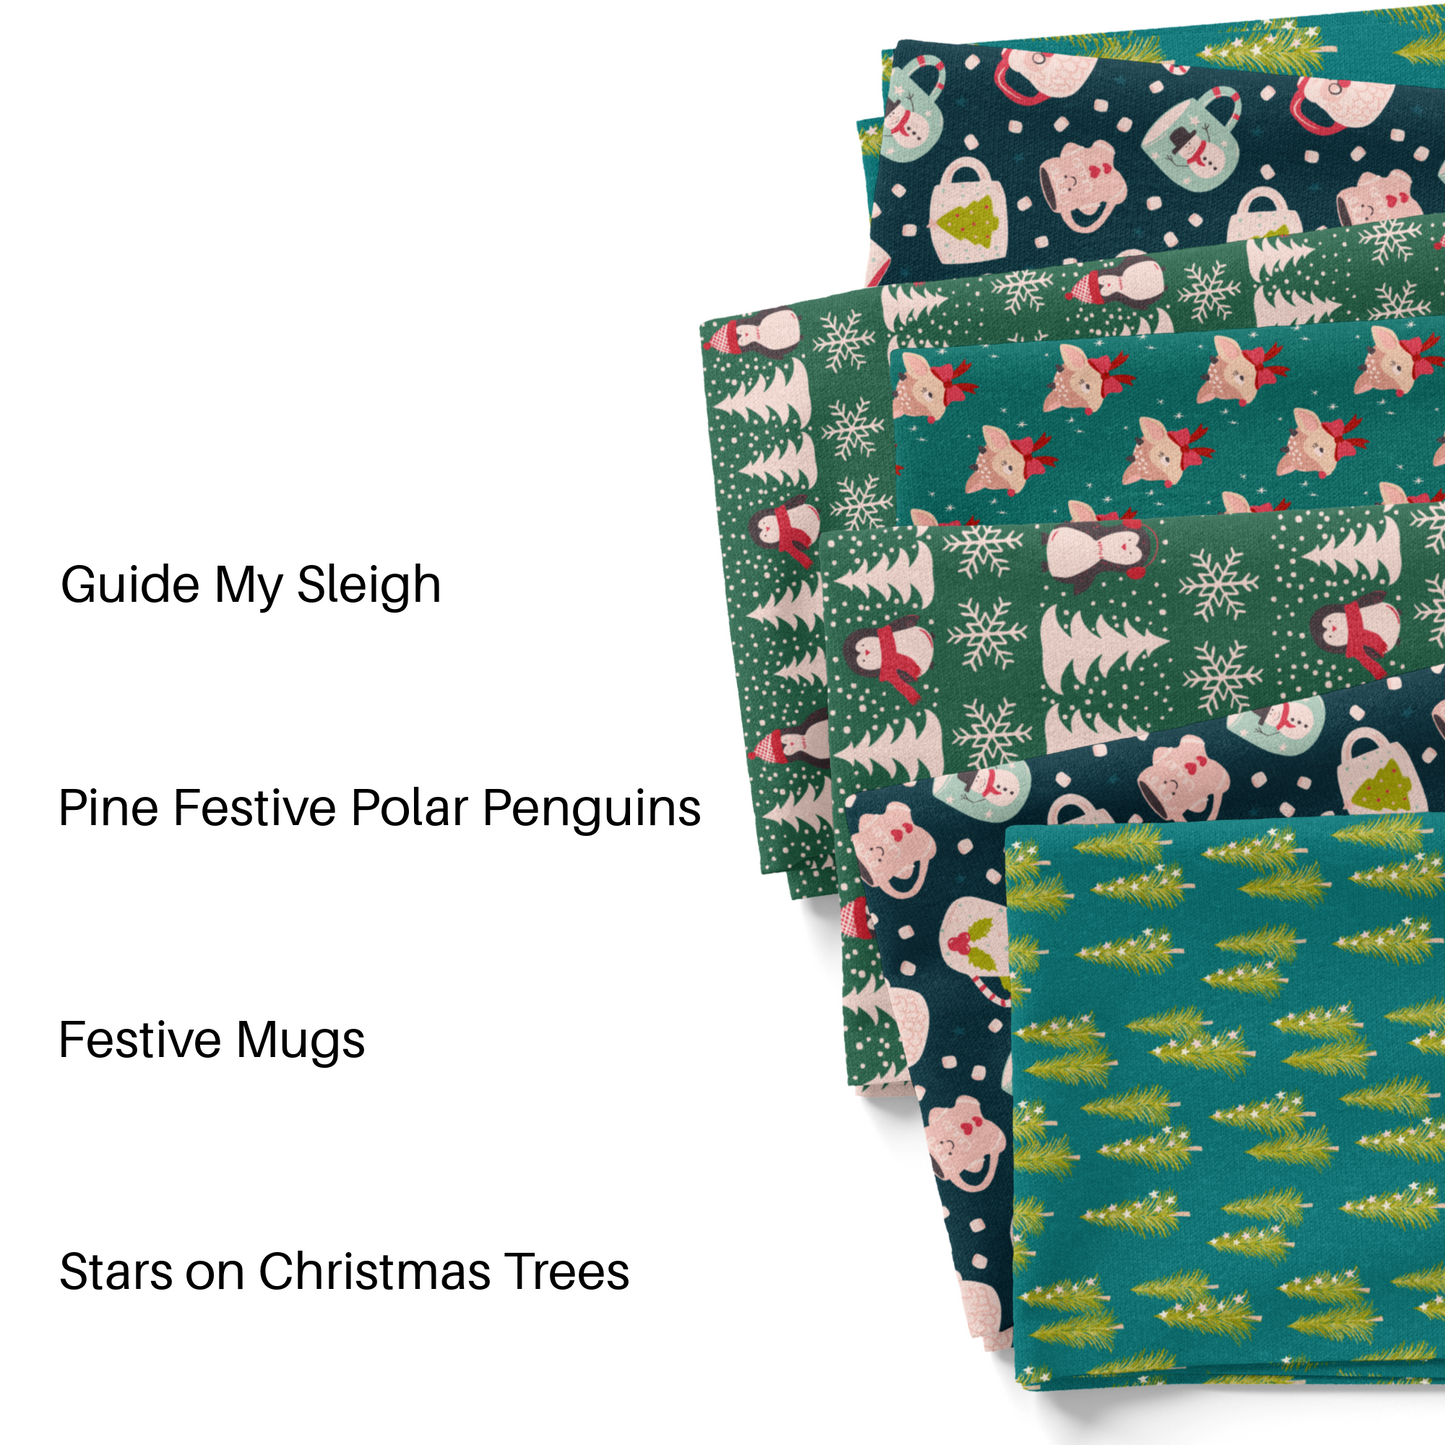 Pink Festive Polar Penguins Fabric By The Yard